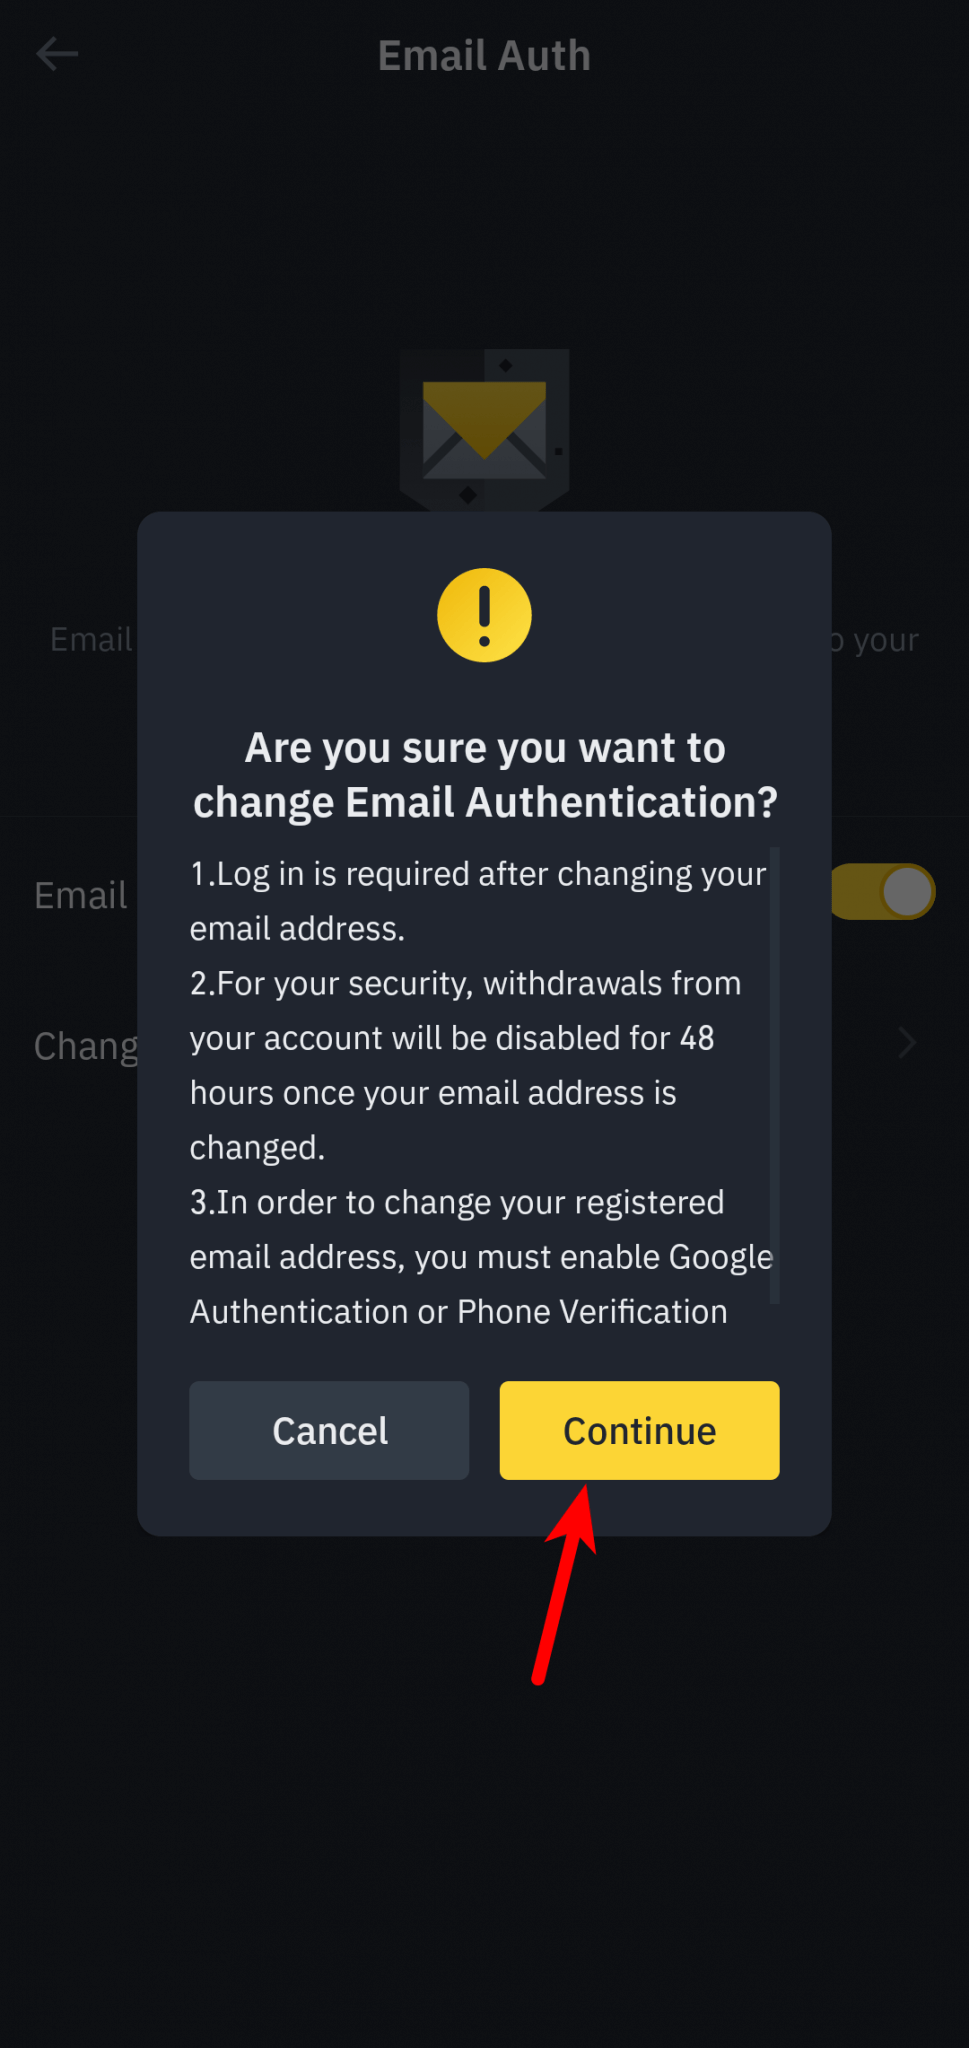 how to change email in binance